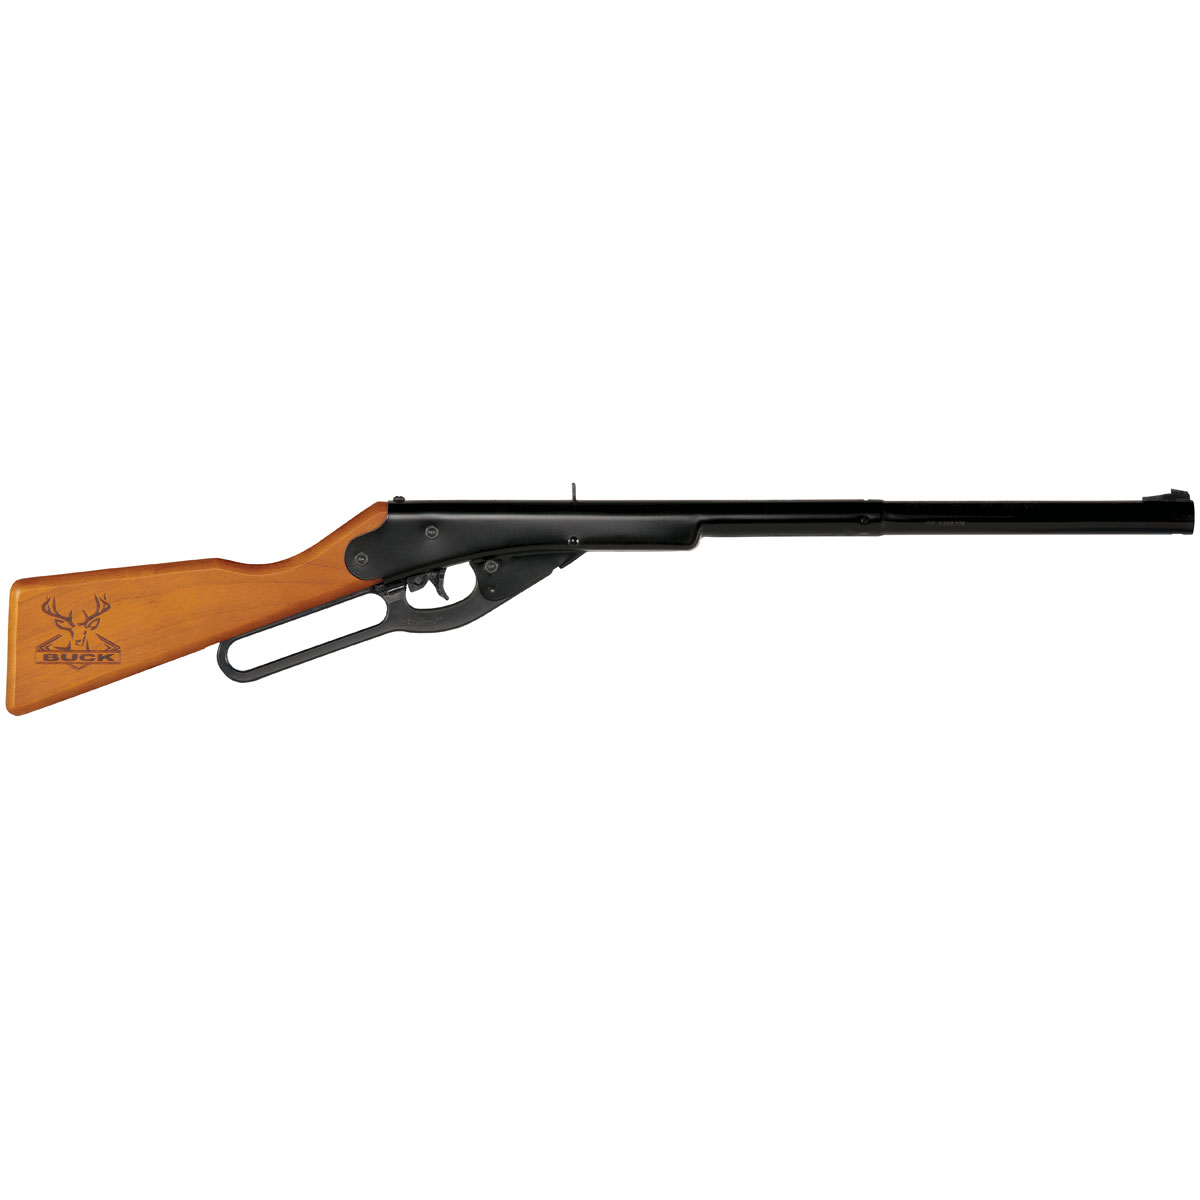 Buck Model 105 Youth BB Air Rifle. For the smallest-frame shooter.